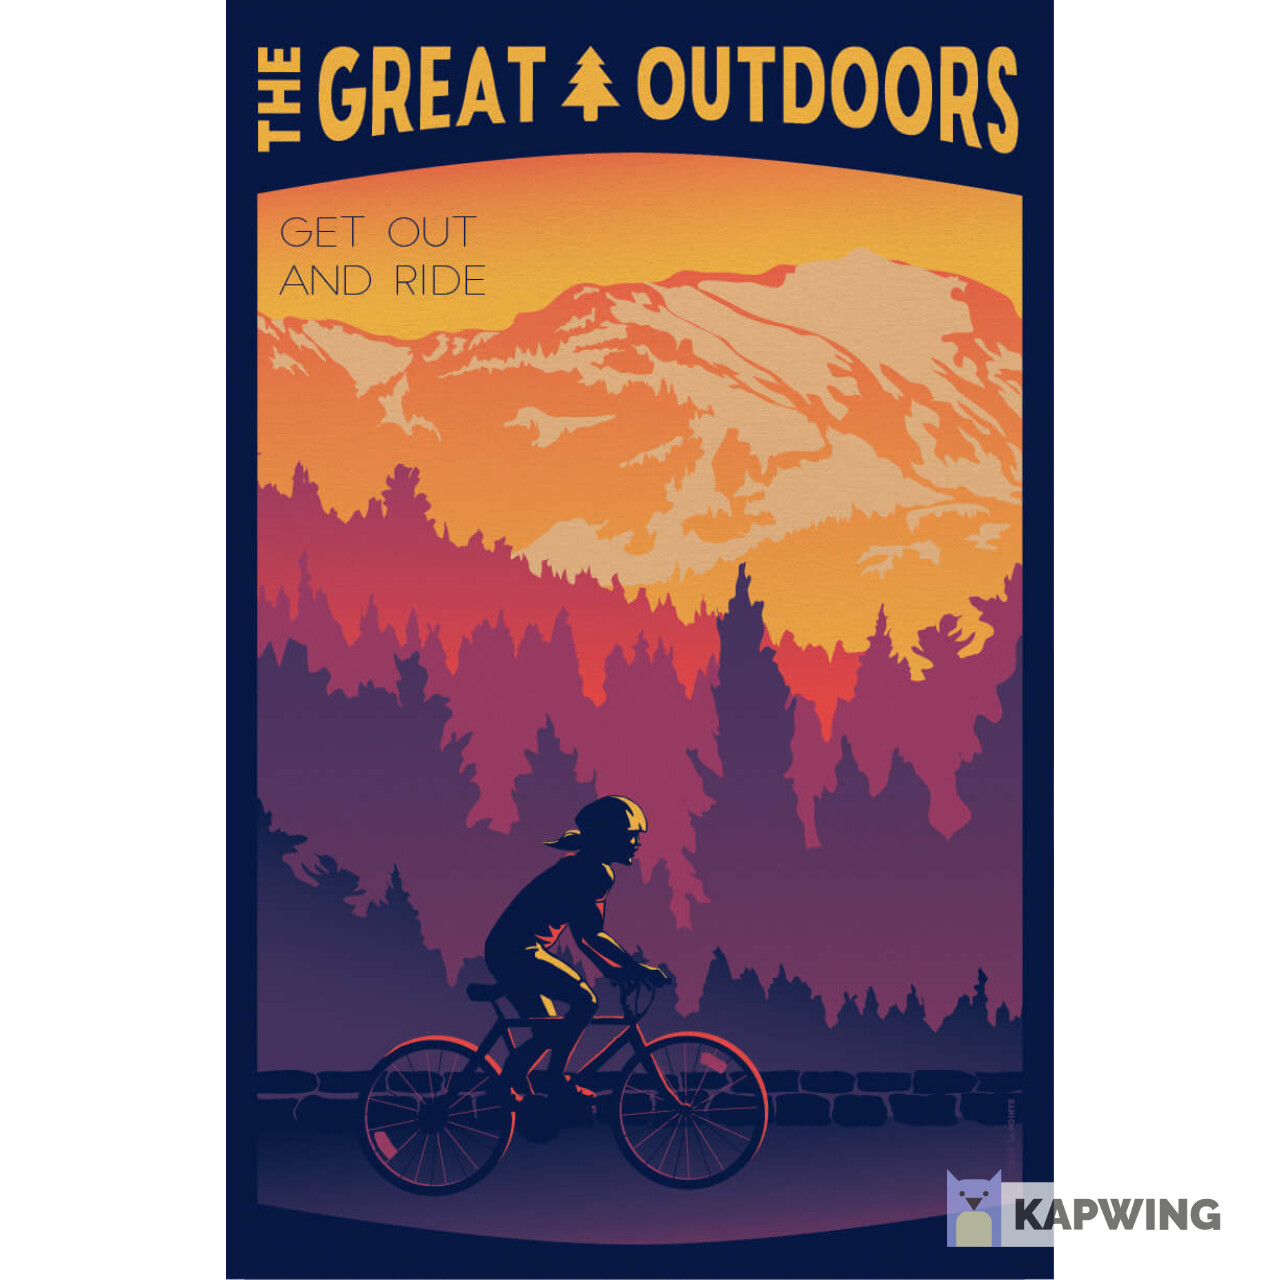 The Great Outdoors: Get Out And Ride Travel Poster - 11x17"